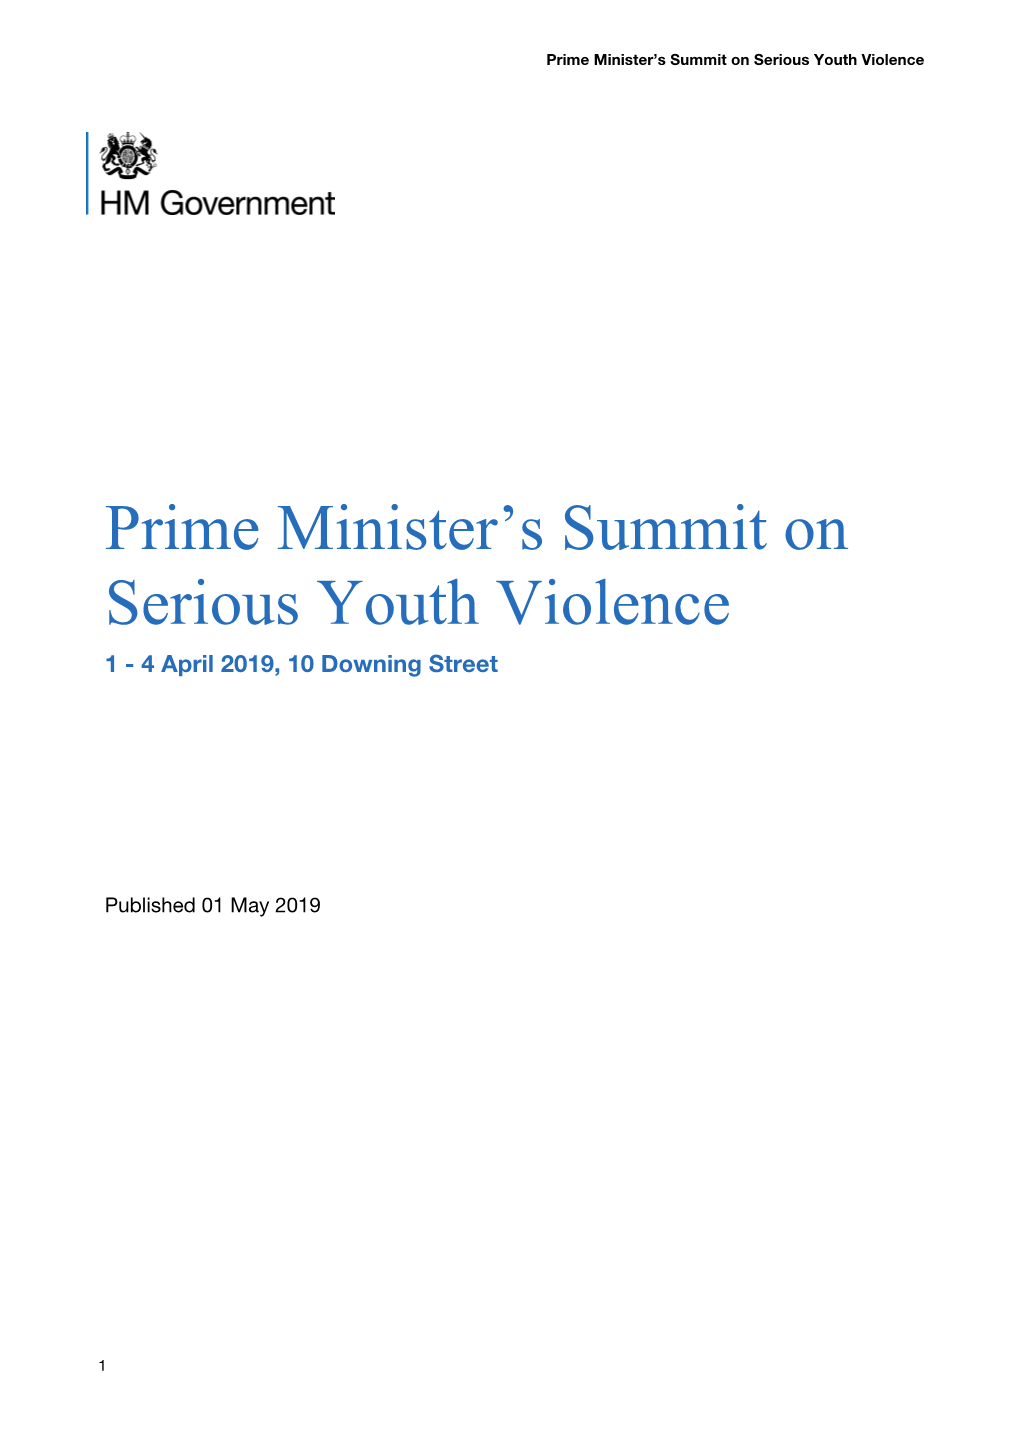 Prime Minister's Summit on Serious Youth Violence